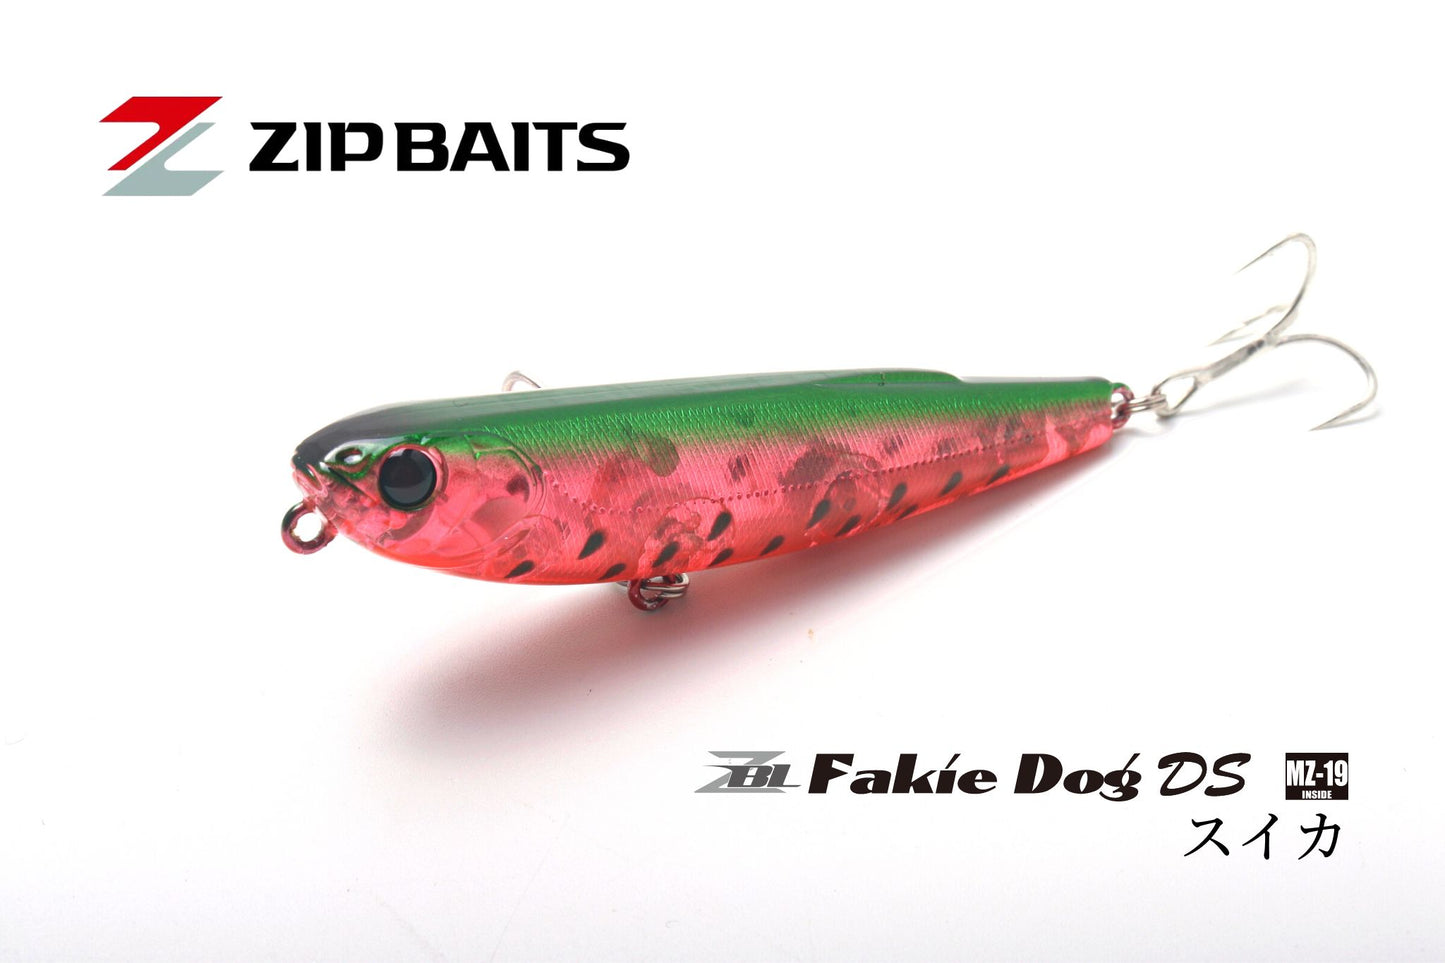 ZBL Fakie Dog/ザブラフェイキードッグDS